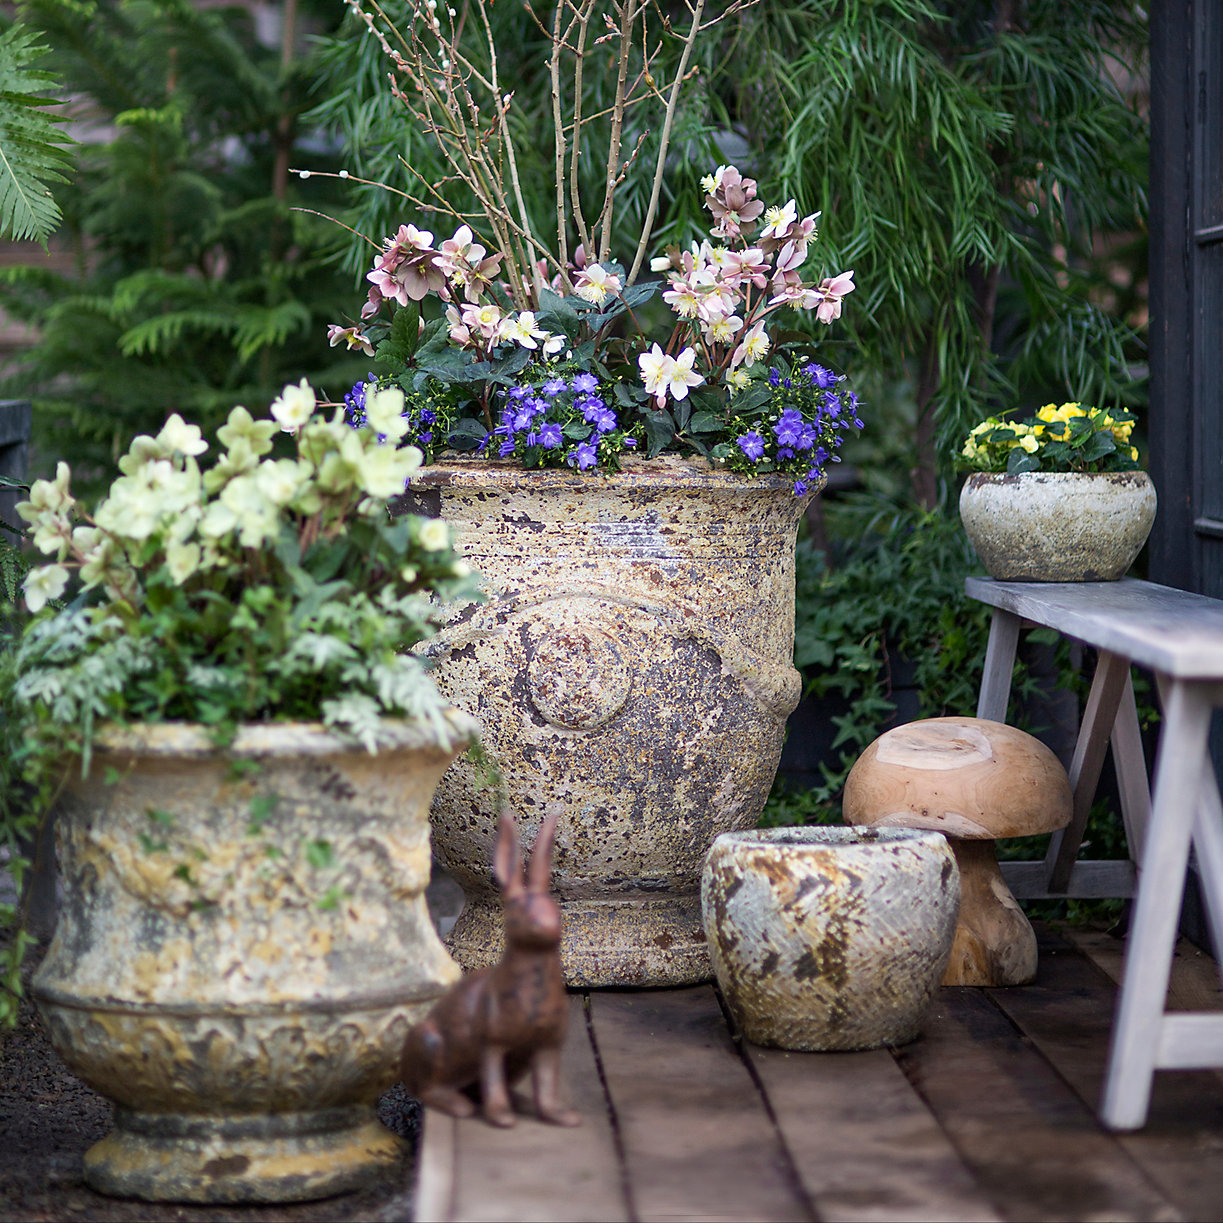 planters with flowers on a brick patio